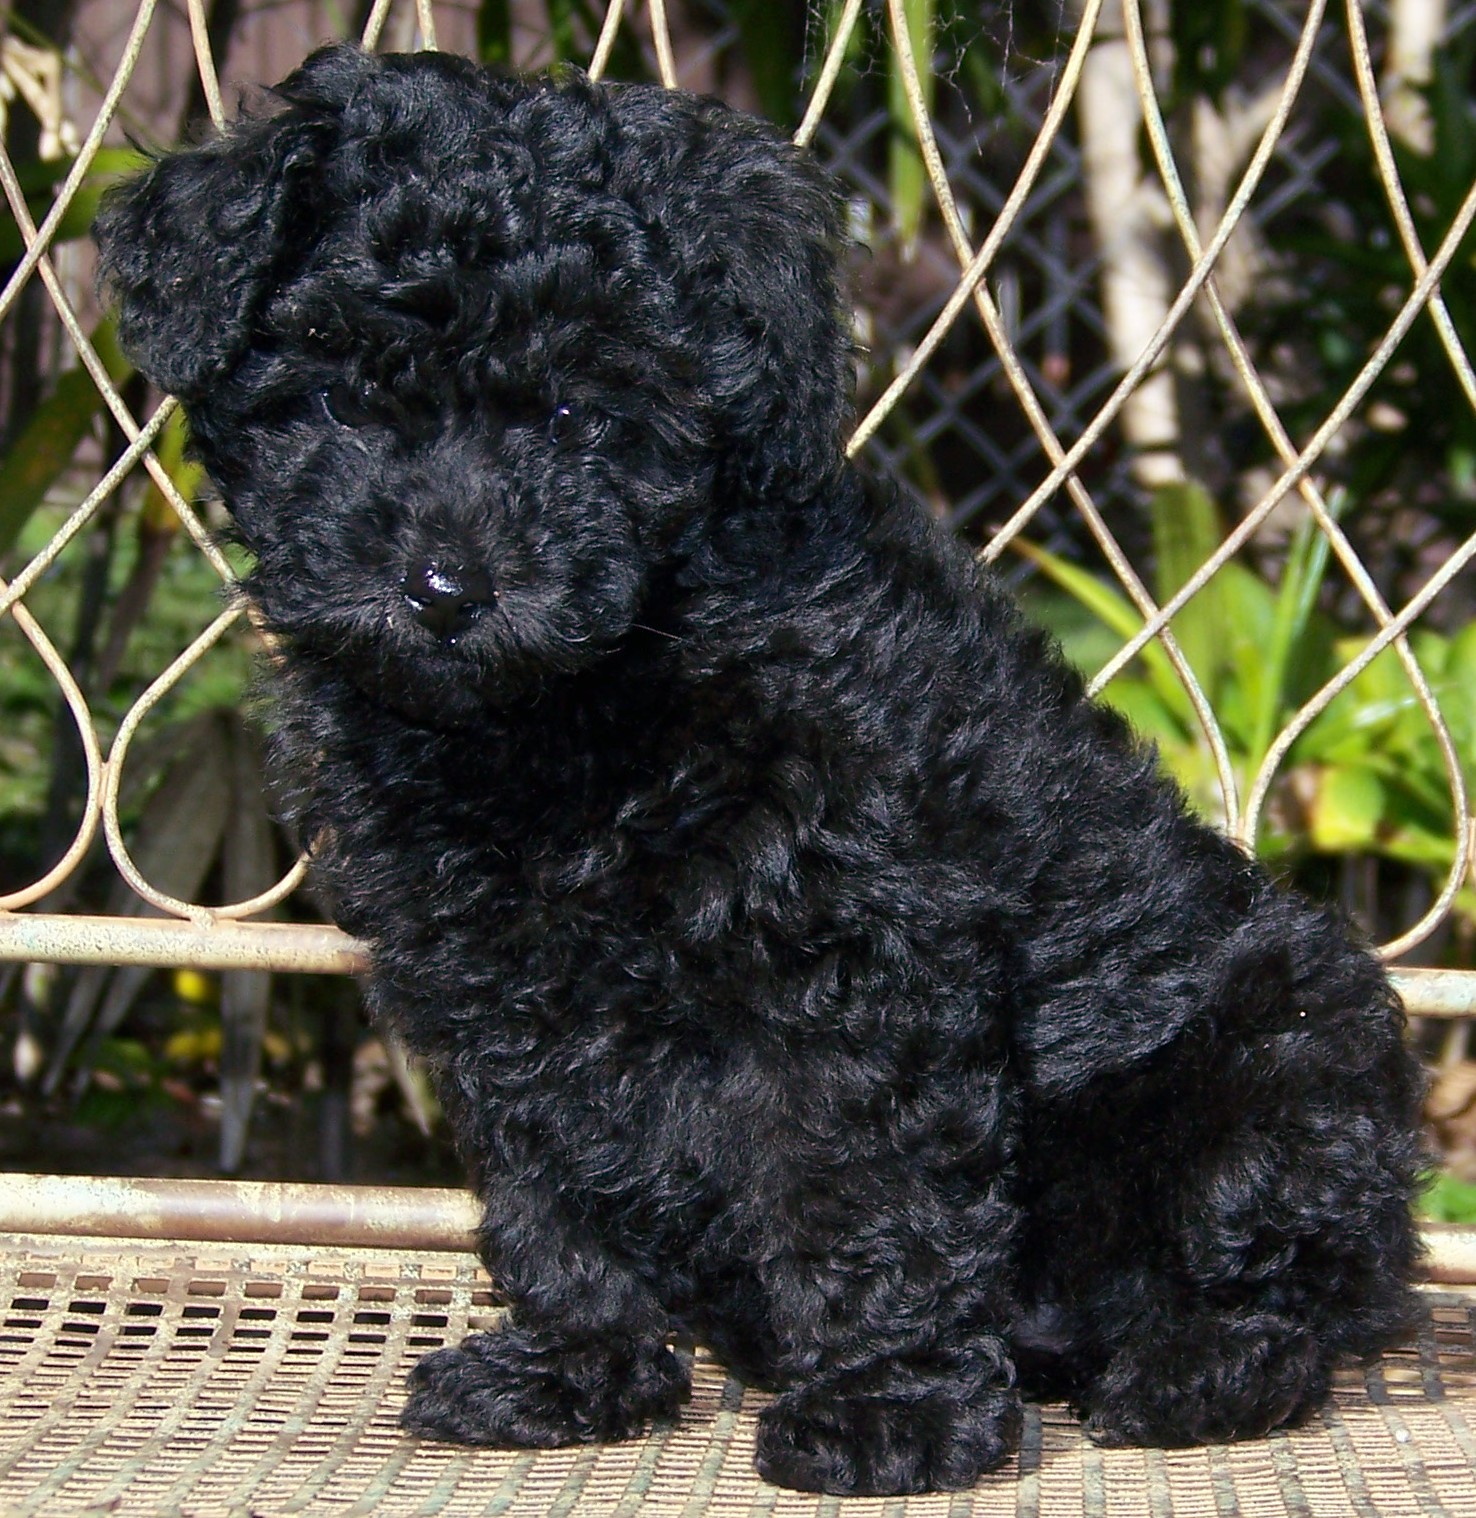 Black Poodle Photo And Wallpaper Beautiful Pictures